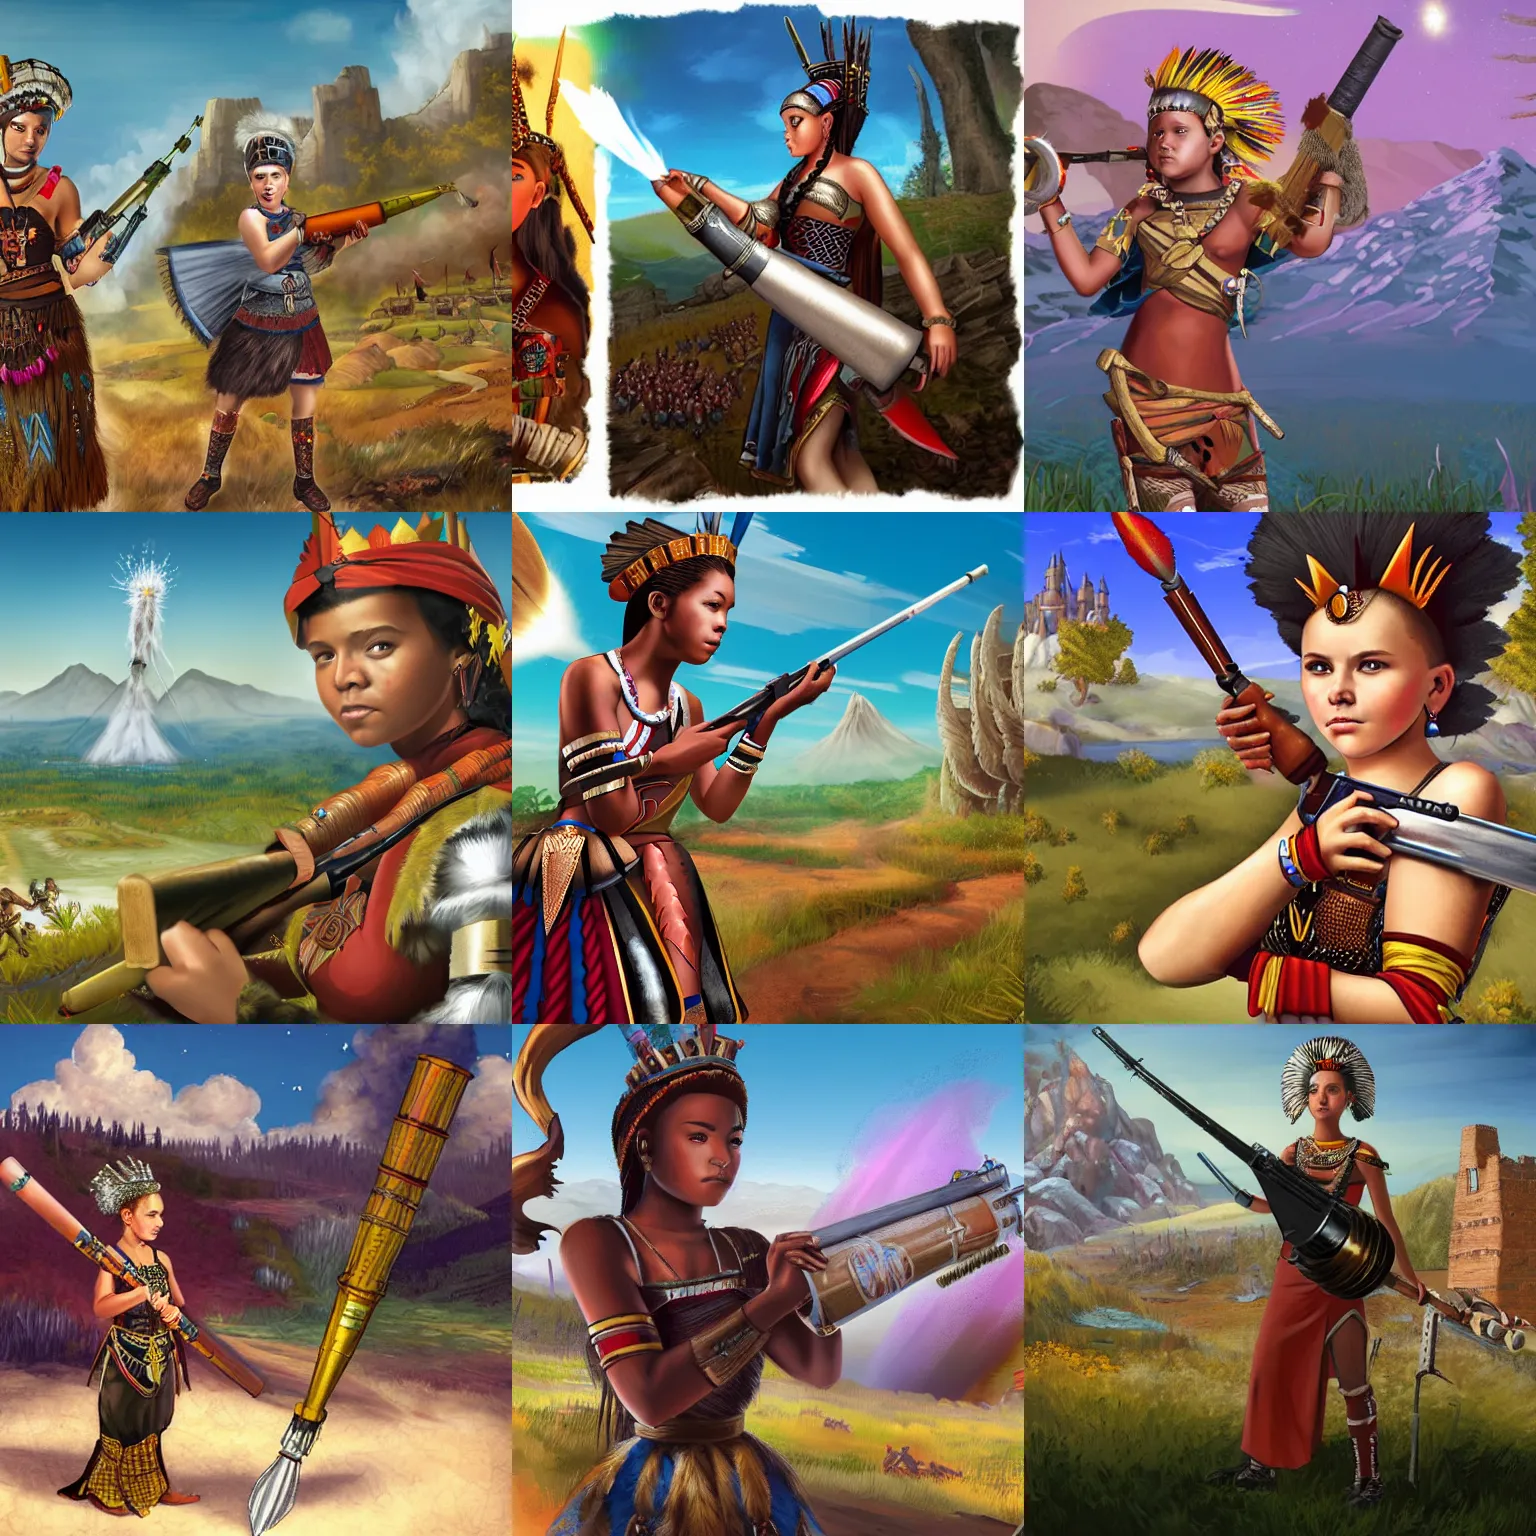 Prompt: A young Mohawk Queen holds a rocket launcher, 1500's, loading screen artwork for the game 'Europa Universalis 4'